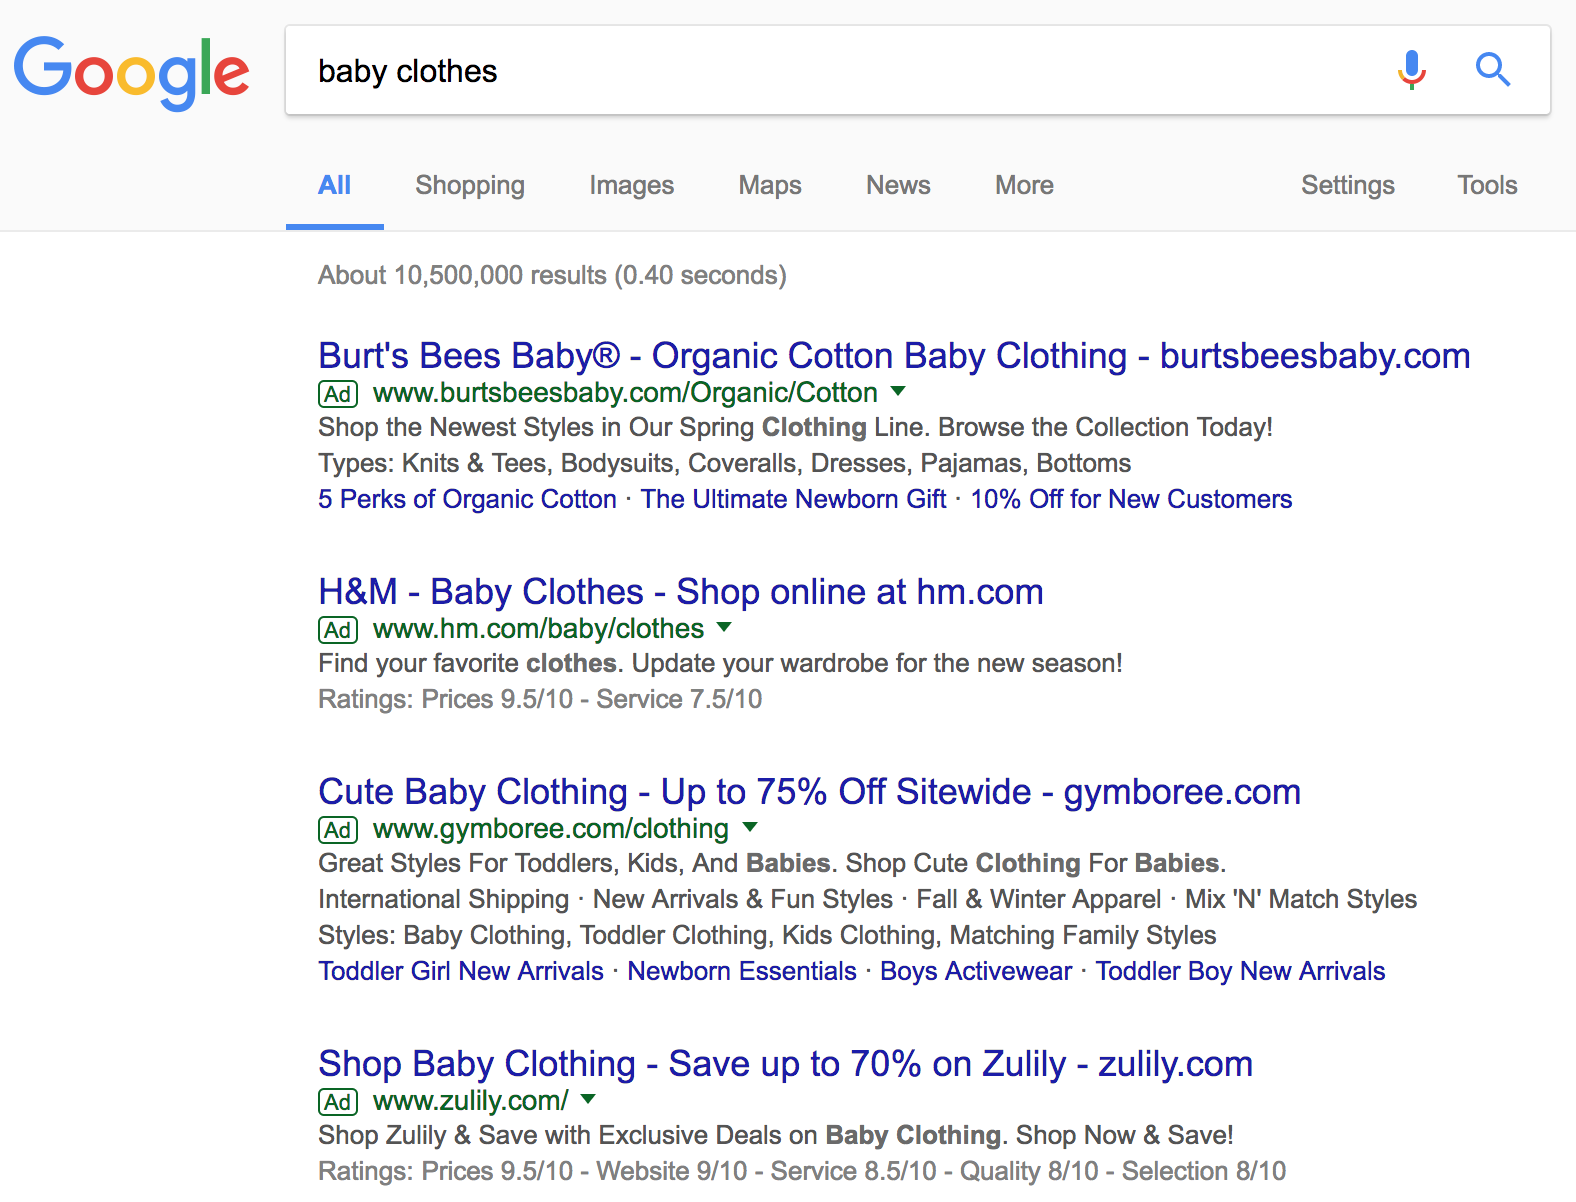 baby clothes examples content marketing